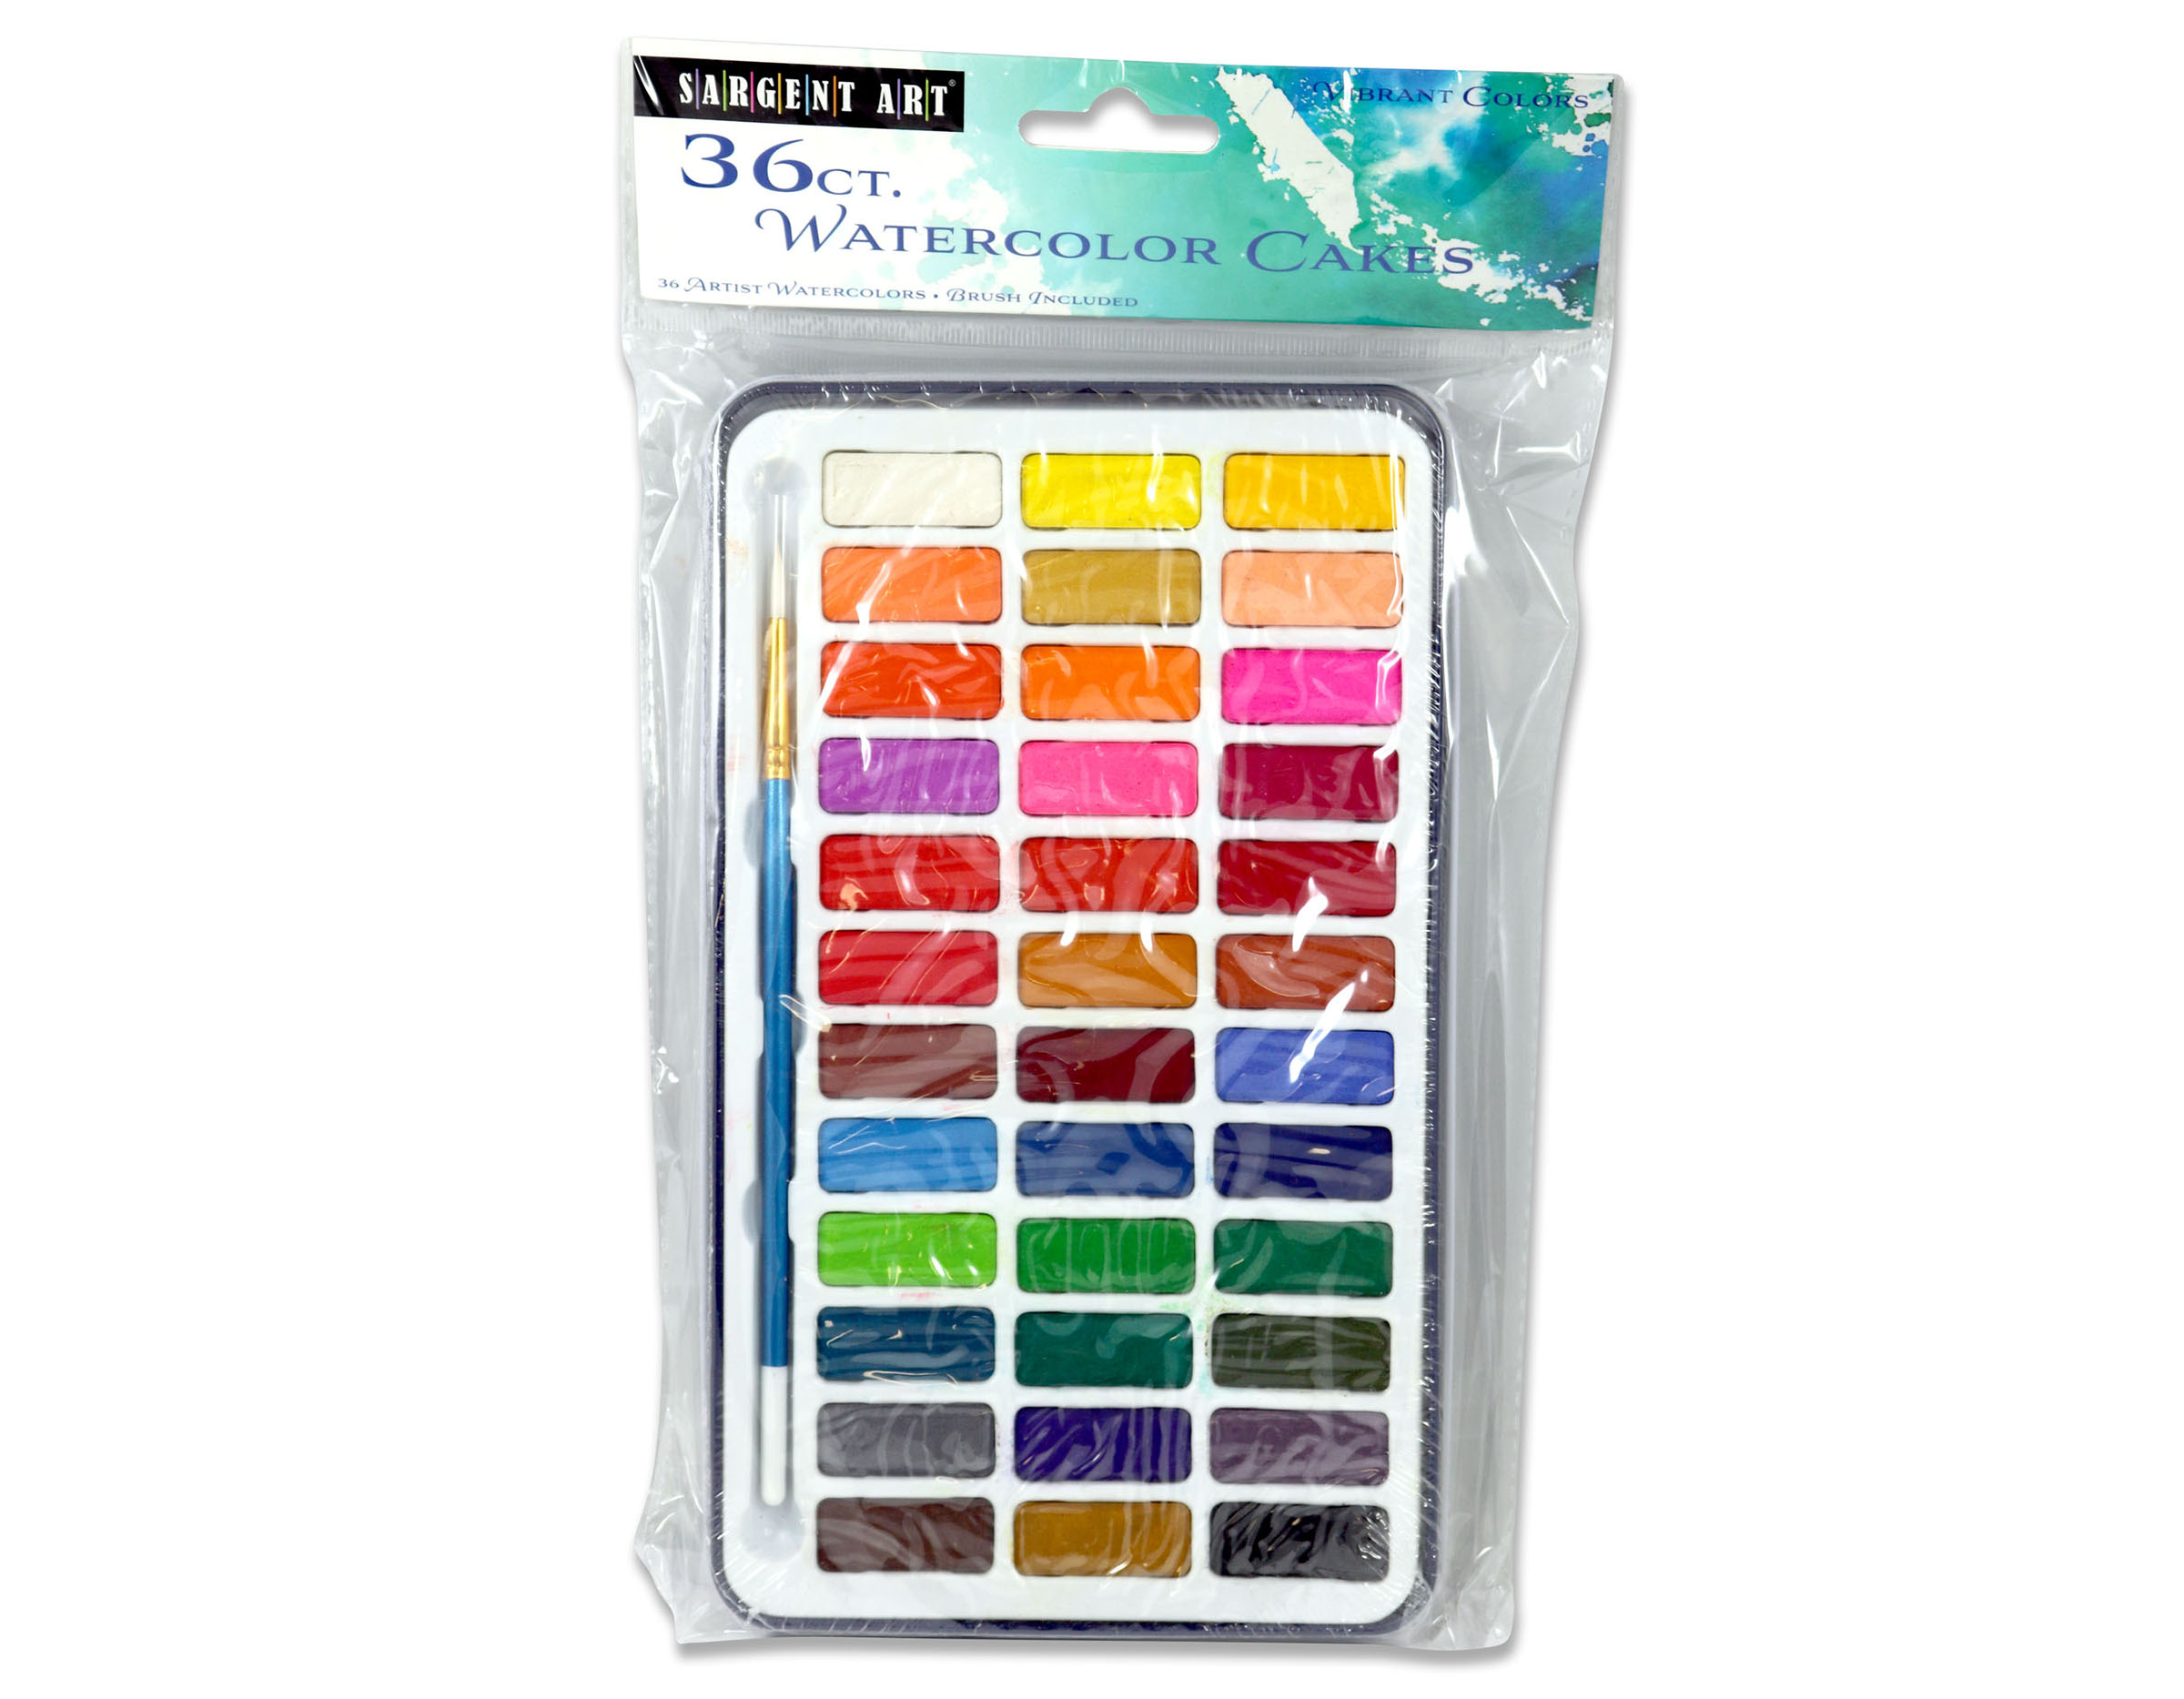 Resin-Coated Premium Watercolor Mixing Tray - 5x3